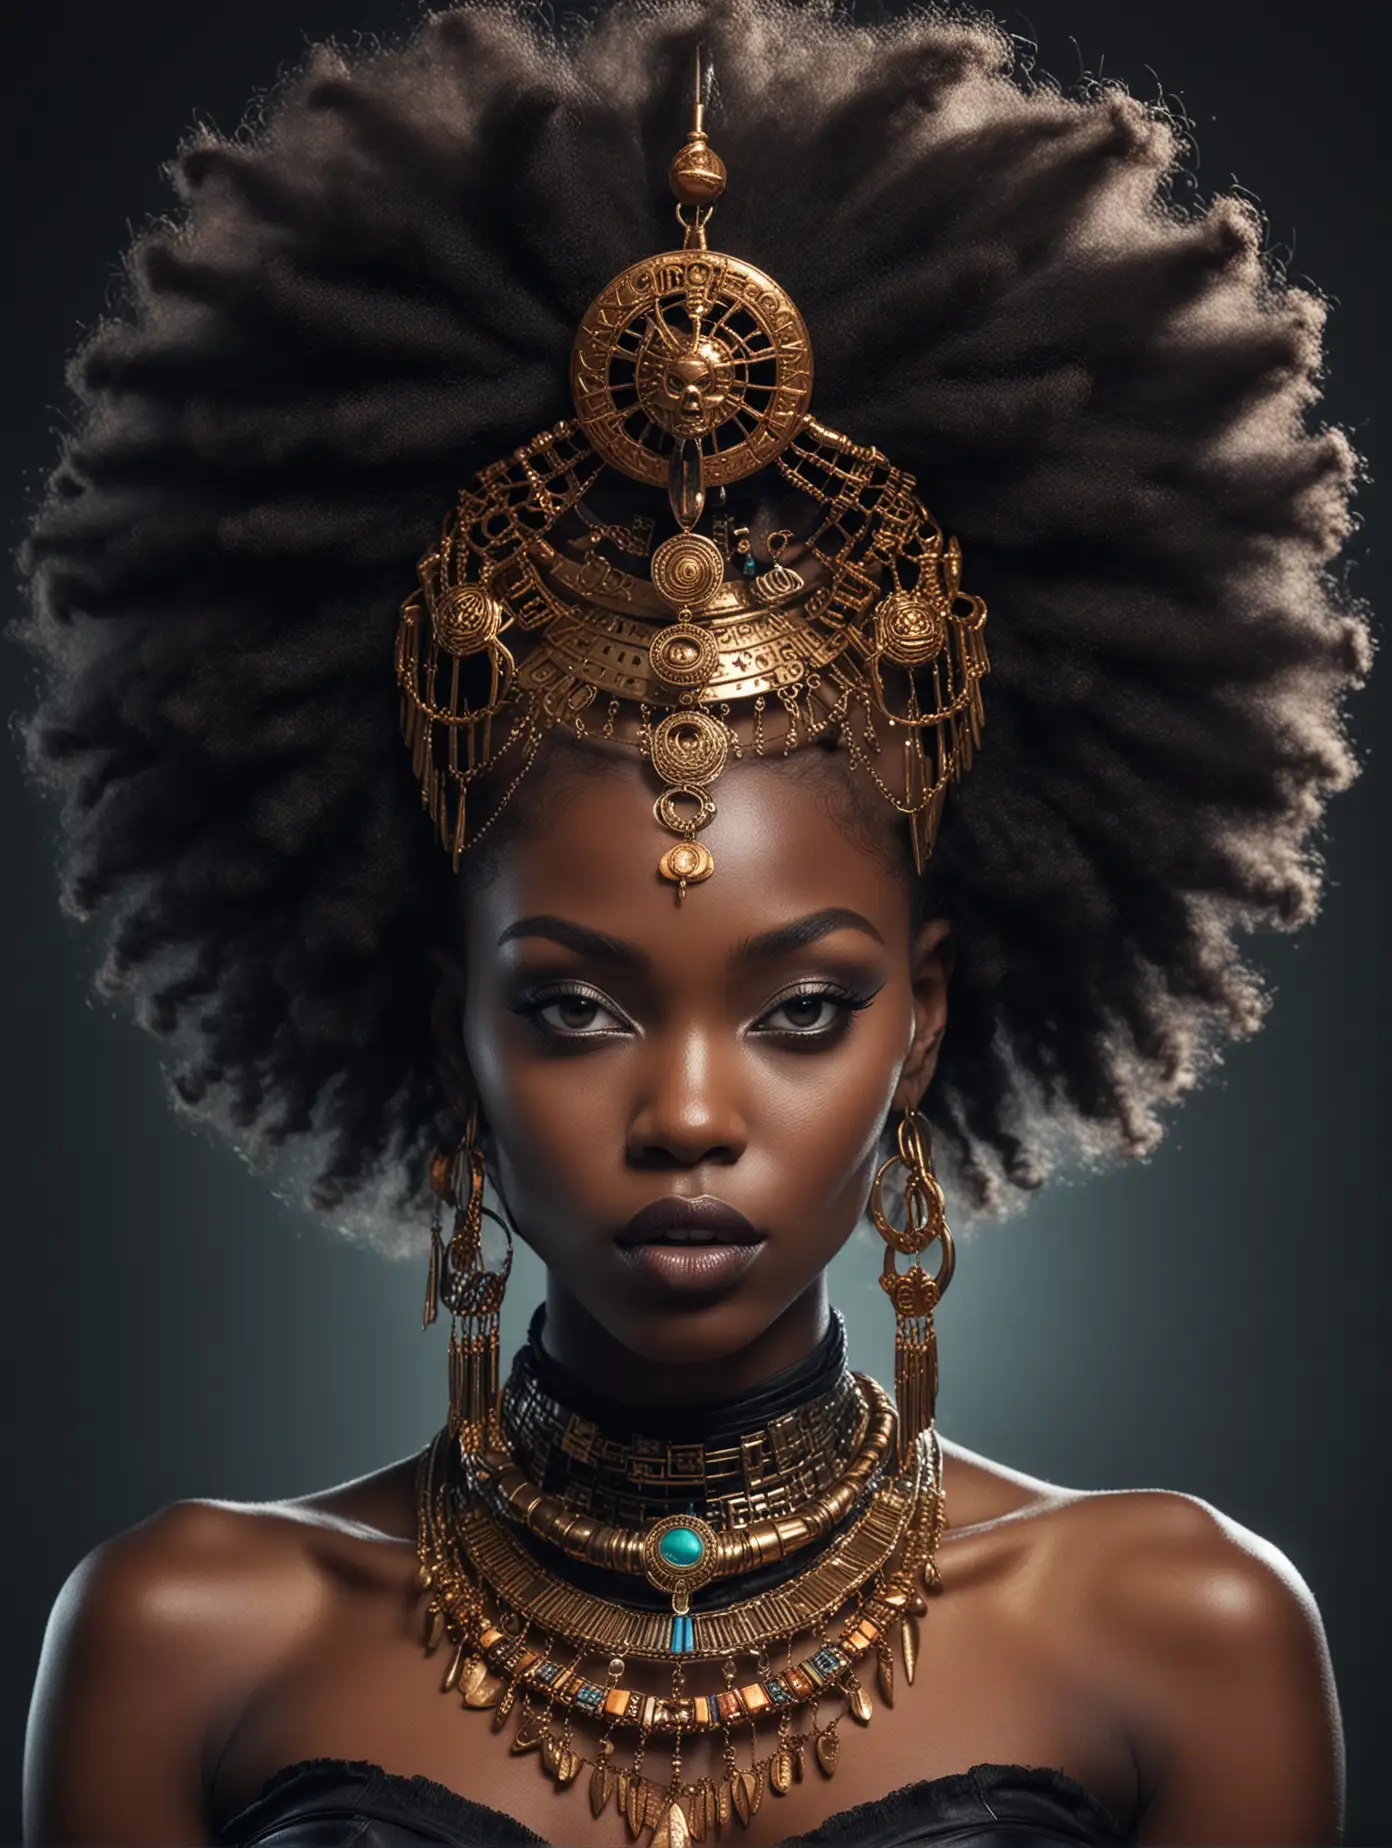 AfroFuturistic Lady Adorned with African Jewelry in a Spooky Halloween Setting